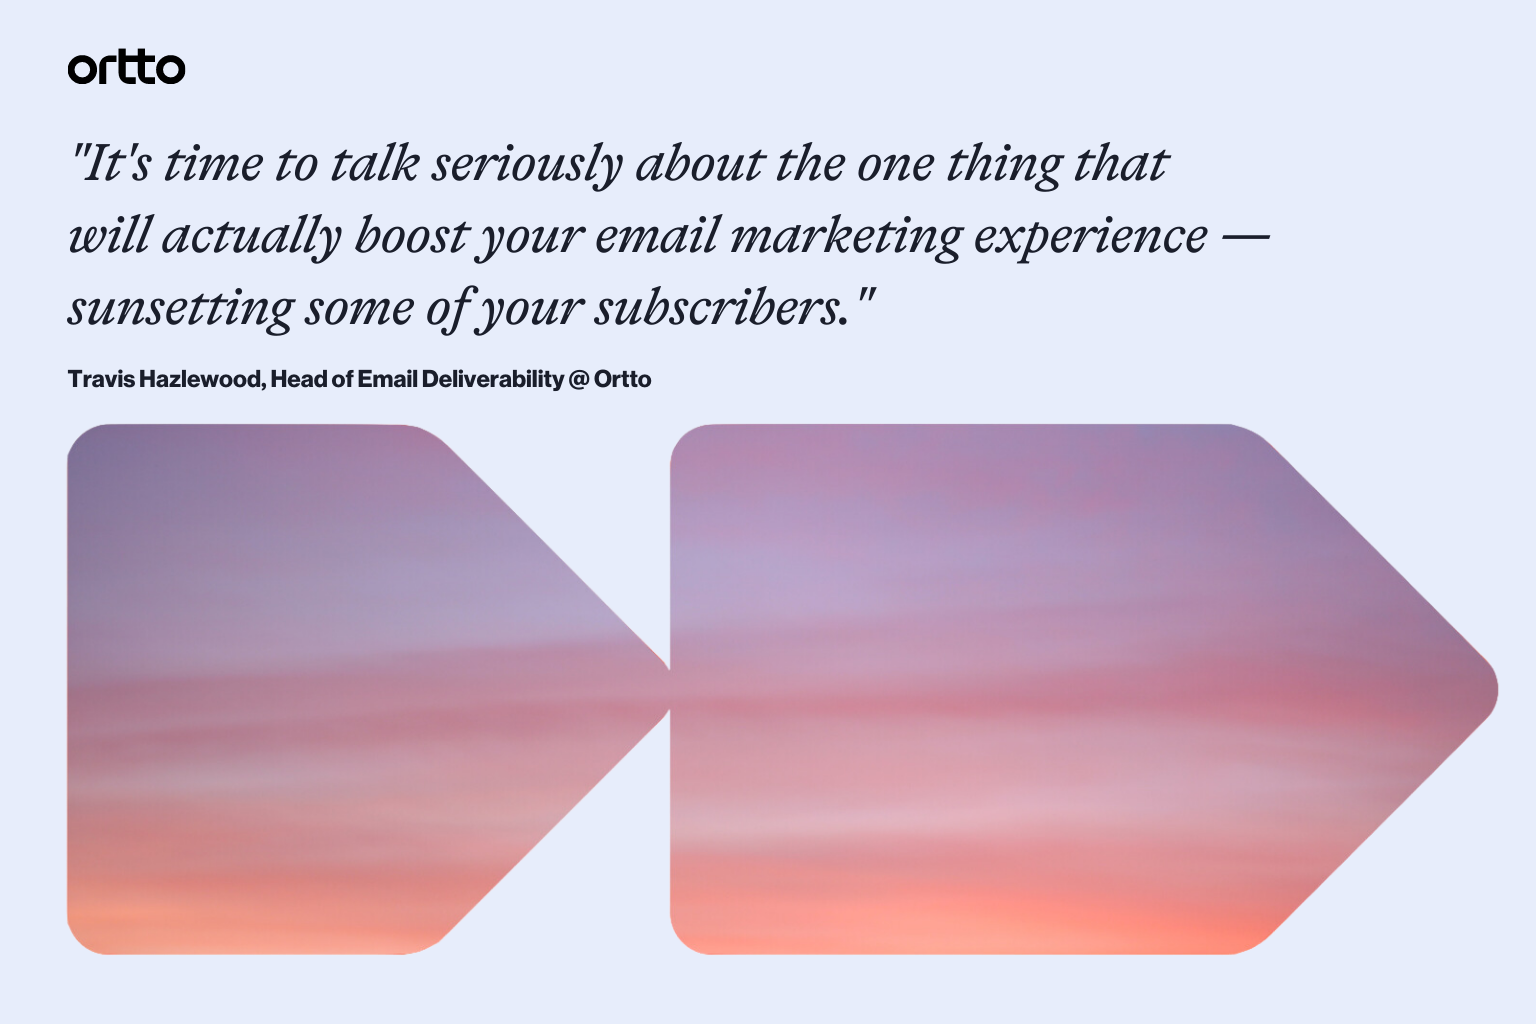 "It's time to talk seriously about the one thing that
will actually boost your email marketing experience — sunsetting some of your subscribers."